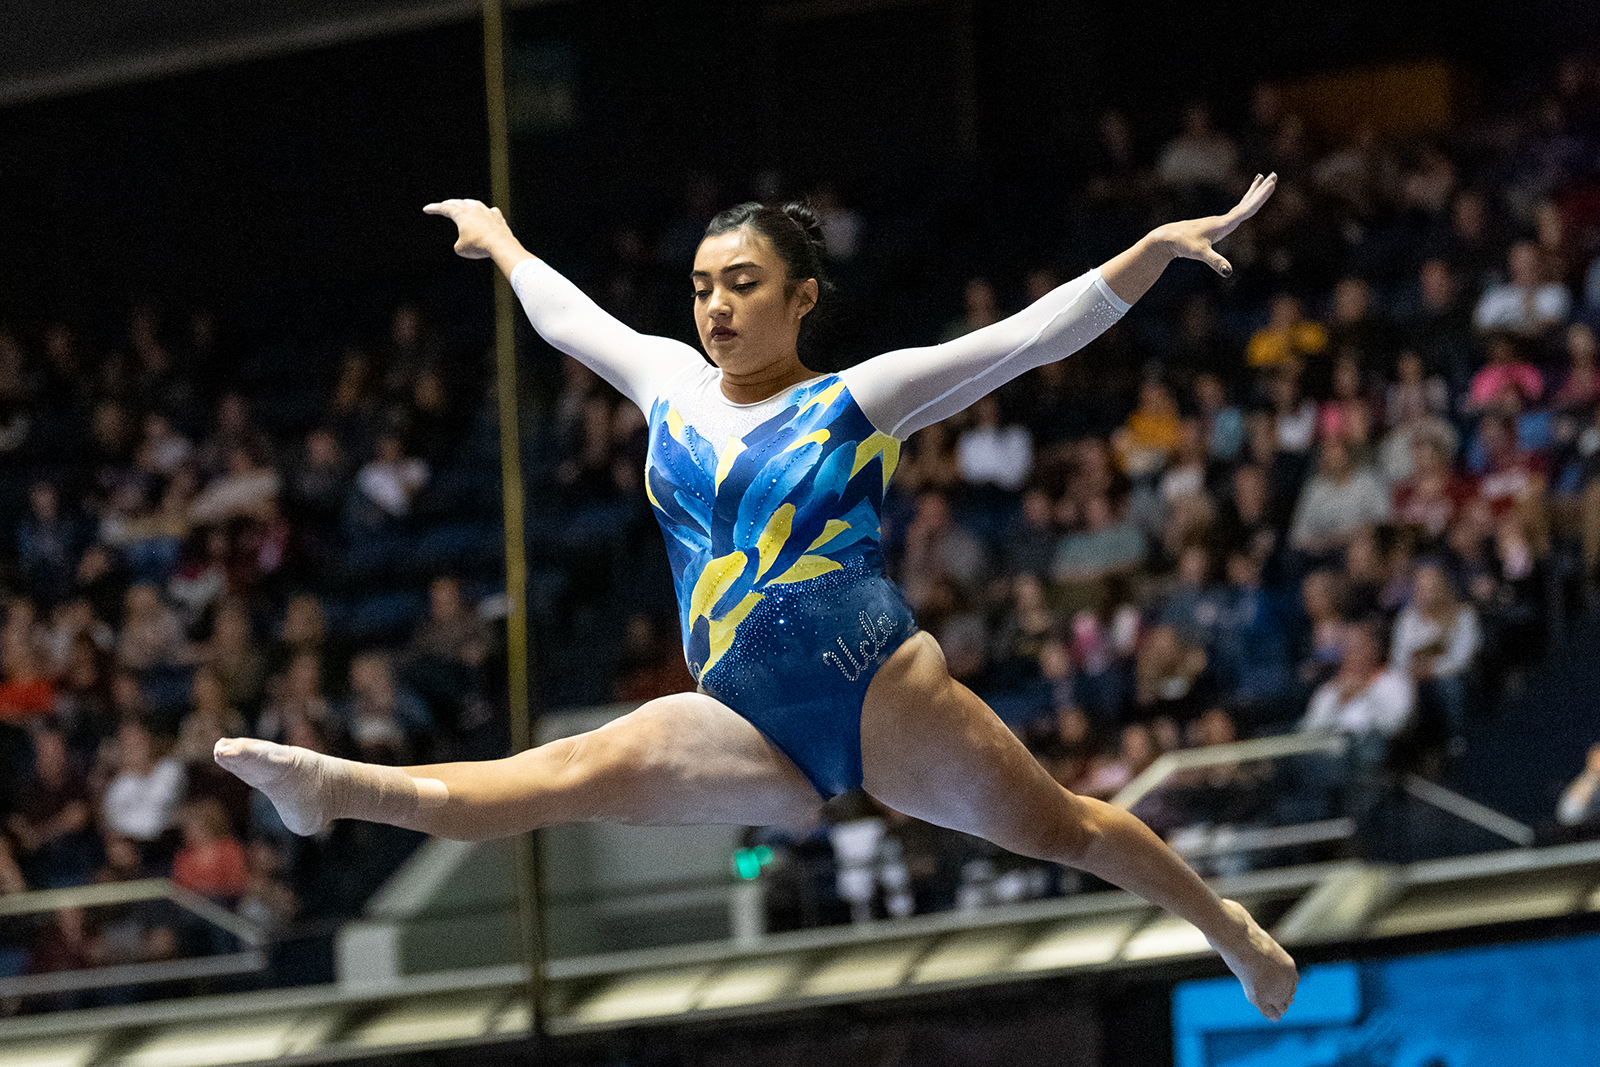 UCLA gymnastics hopes to keep up momentum going into meet given tight  schedule - Daily Bruin